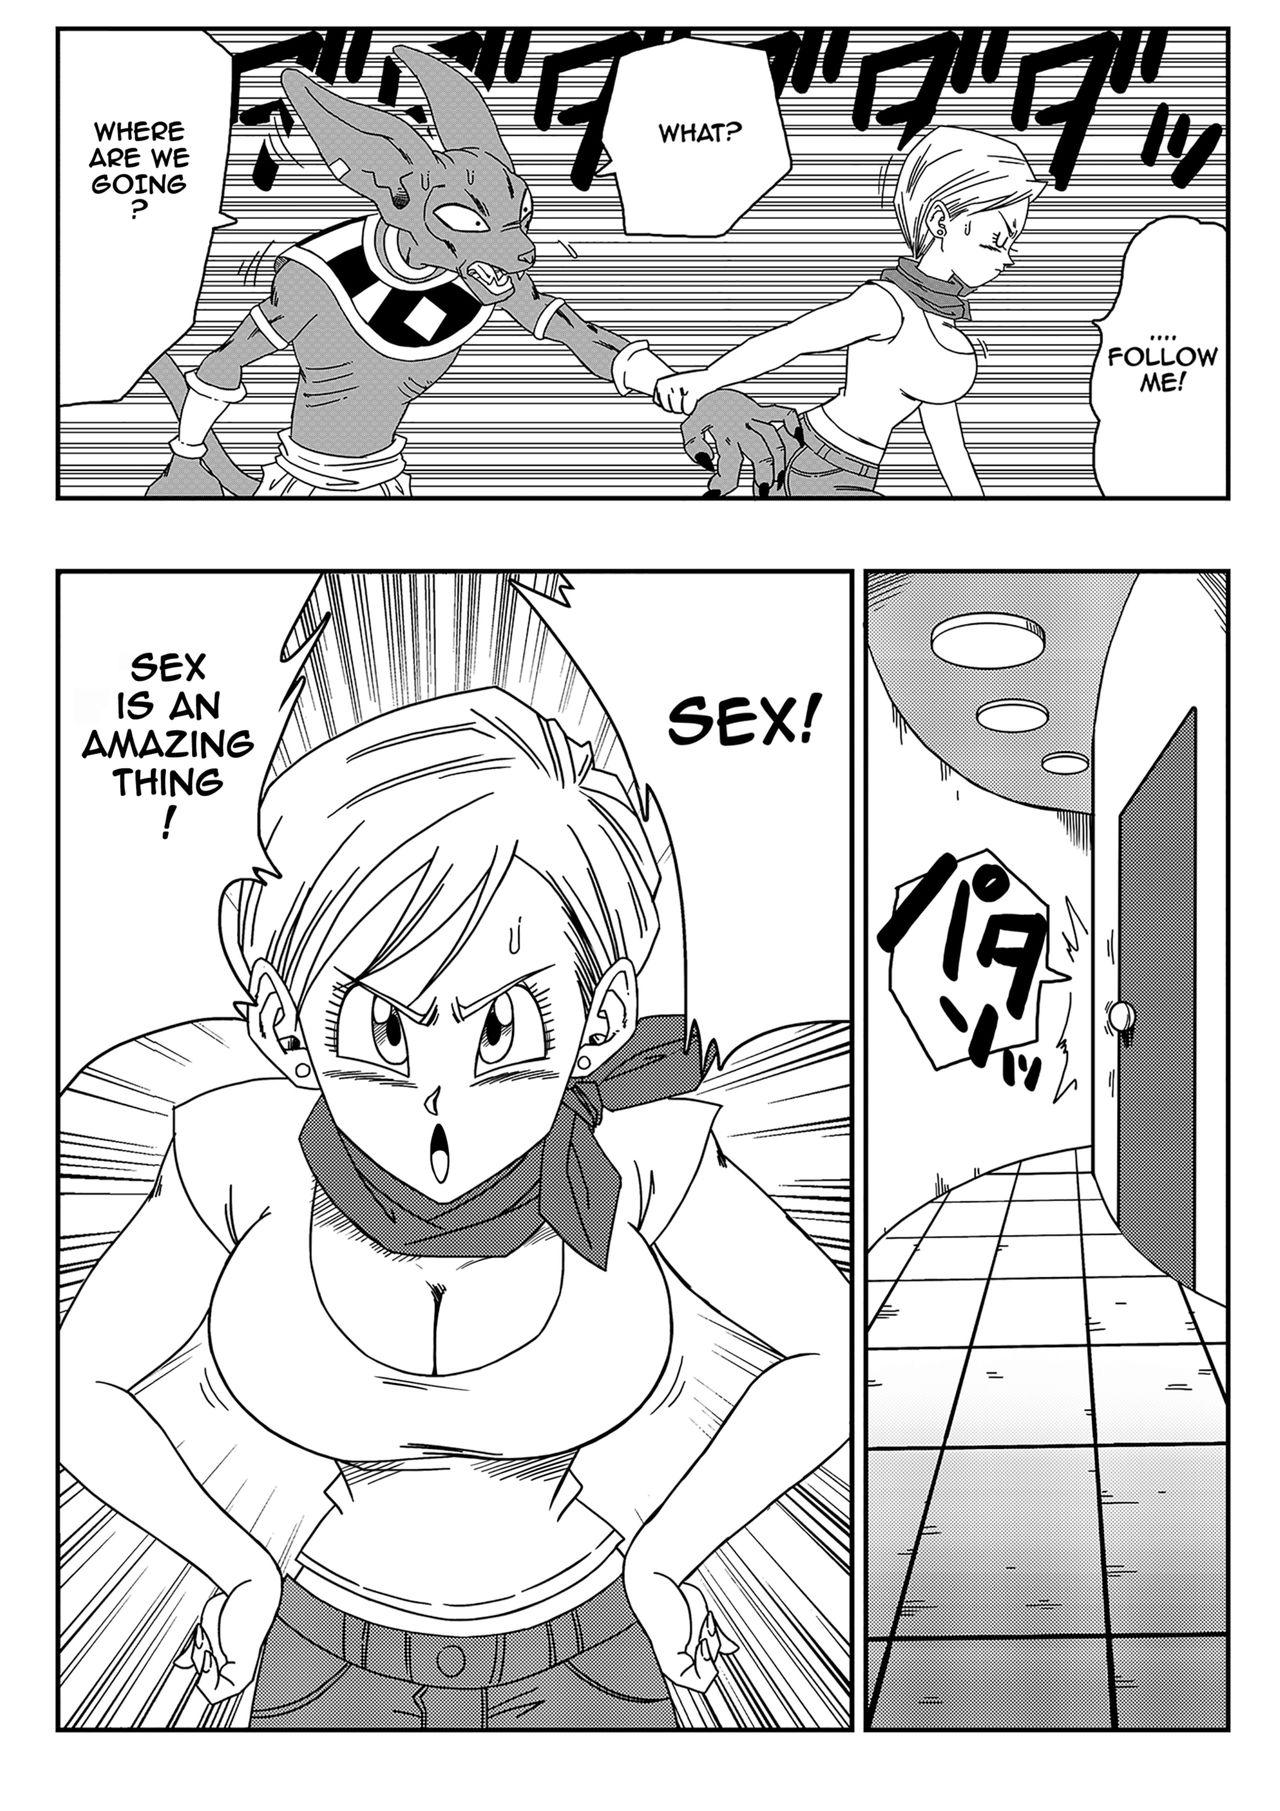 Amature Sex Tapes Bulma Saves The Earth! - Dragon ball New - Page 4